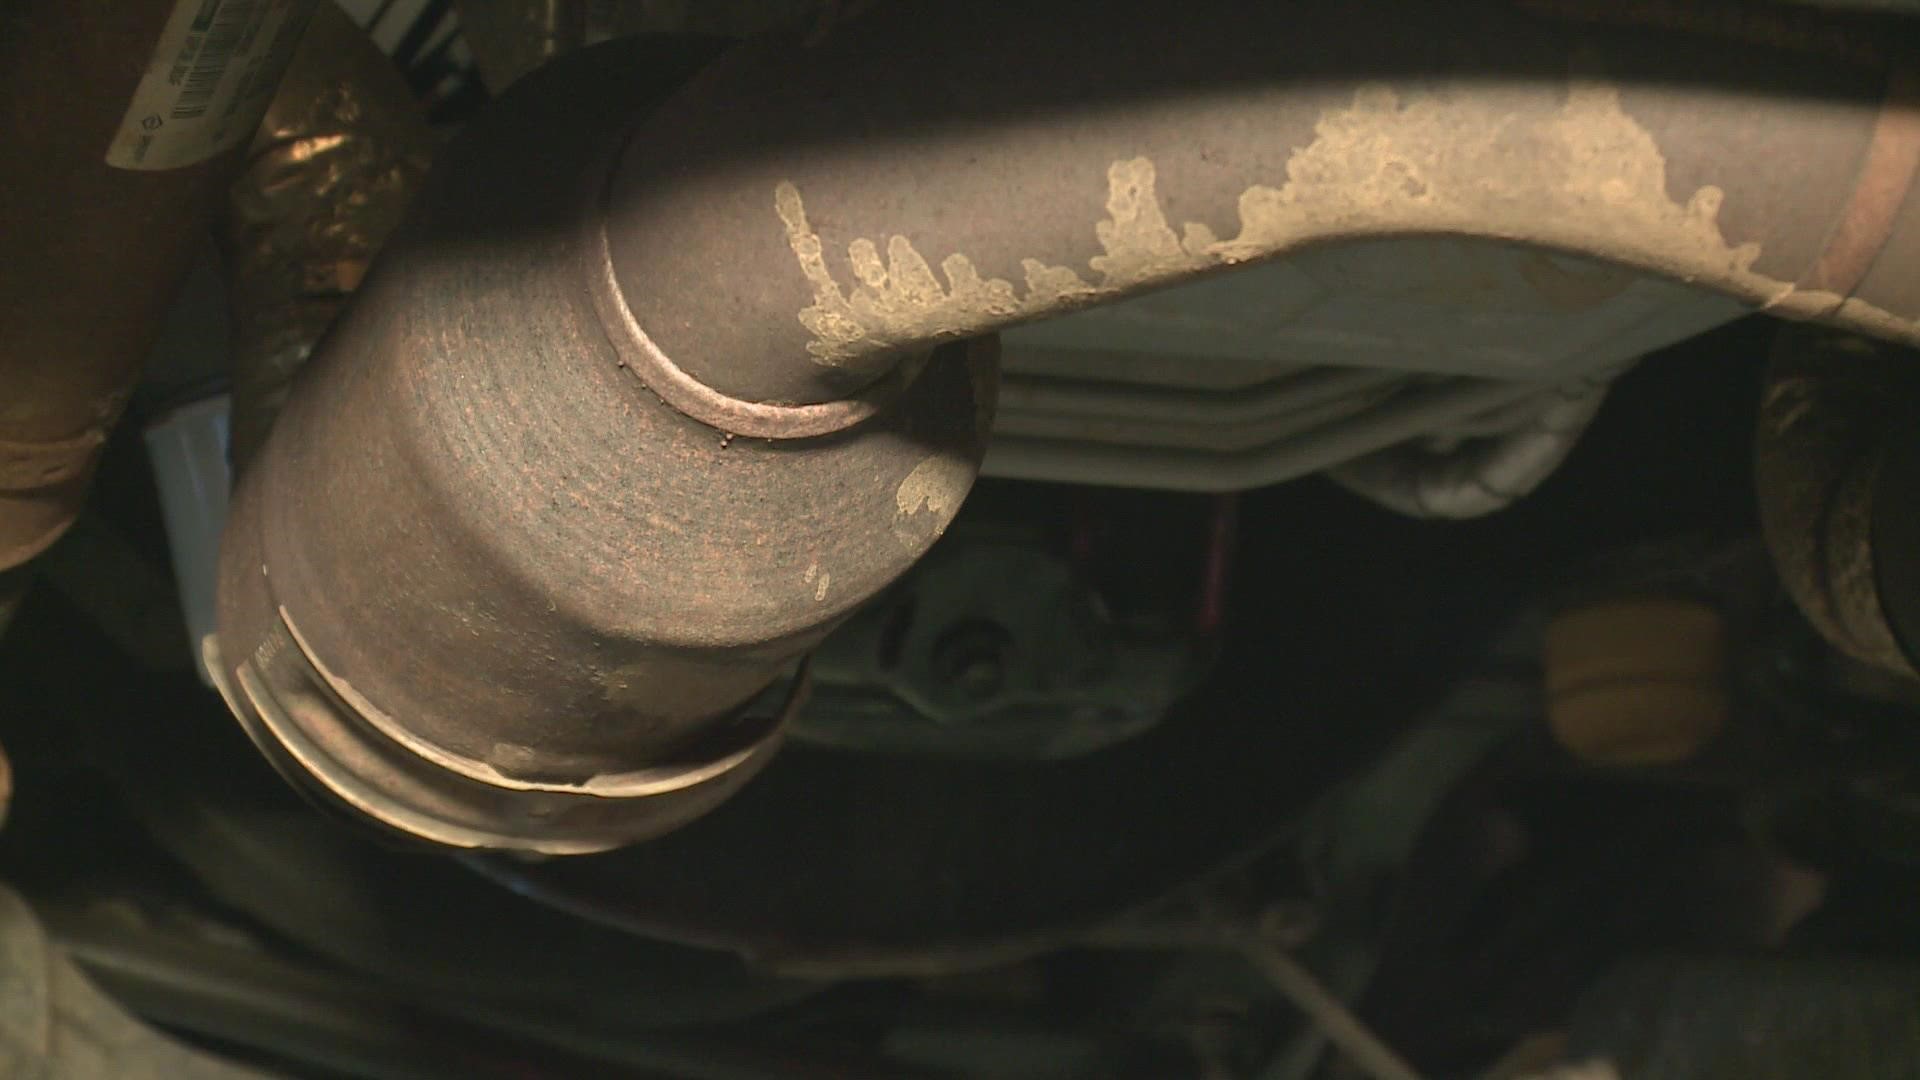 Police say it would have cost over $2 million to replace the 1,000 stolen catalytic converters that were confiscated.